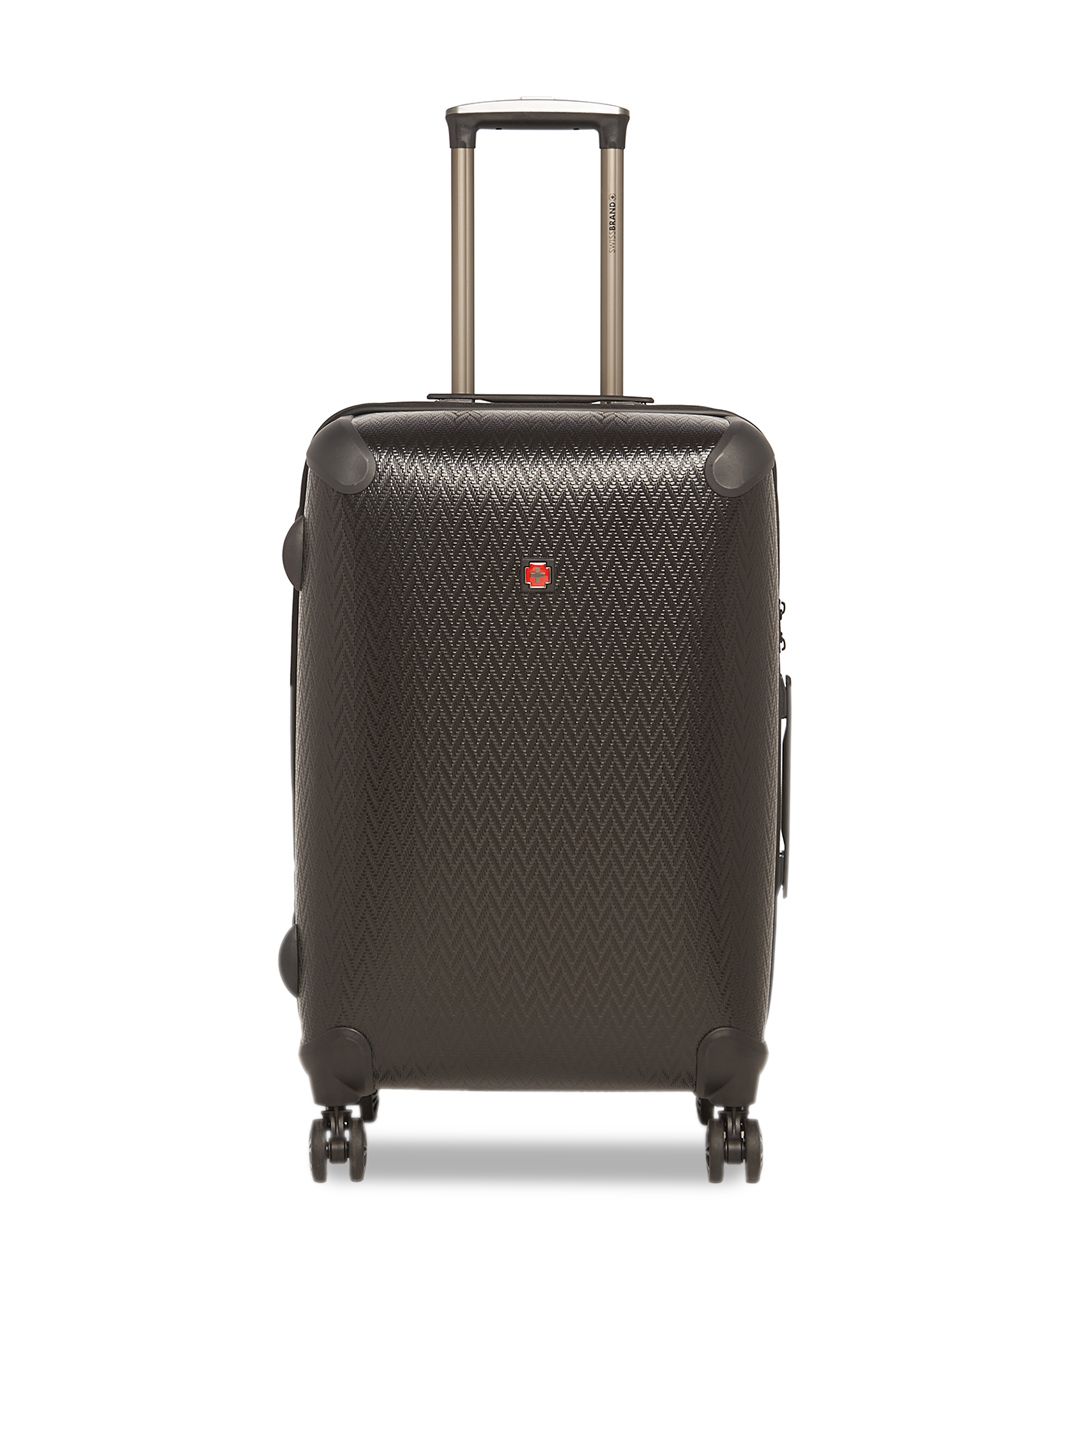 SWISS BRAND Black Textured ETOY Hard-Sided Medium Trolley Suitcase Price in India